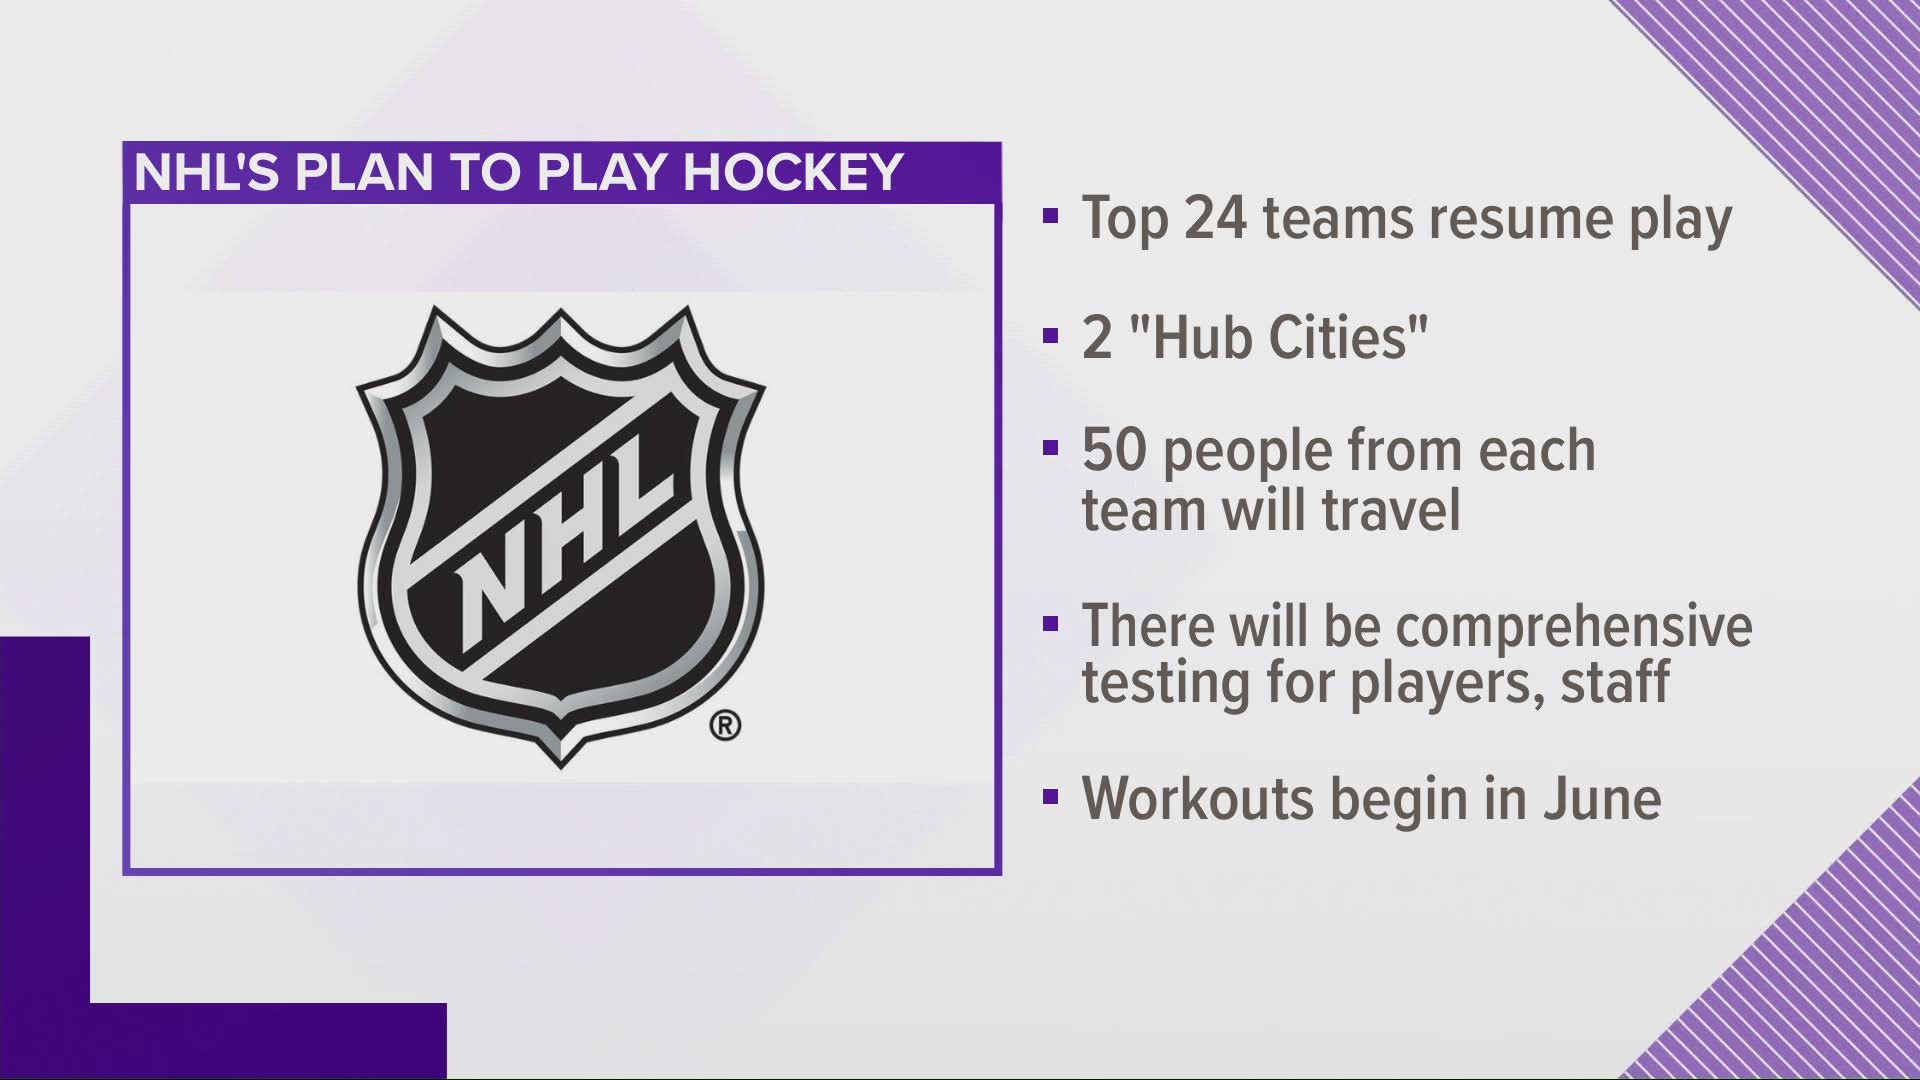 The remaining playoff teams would play in two hub cities.